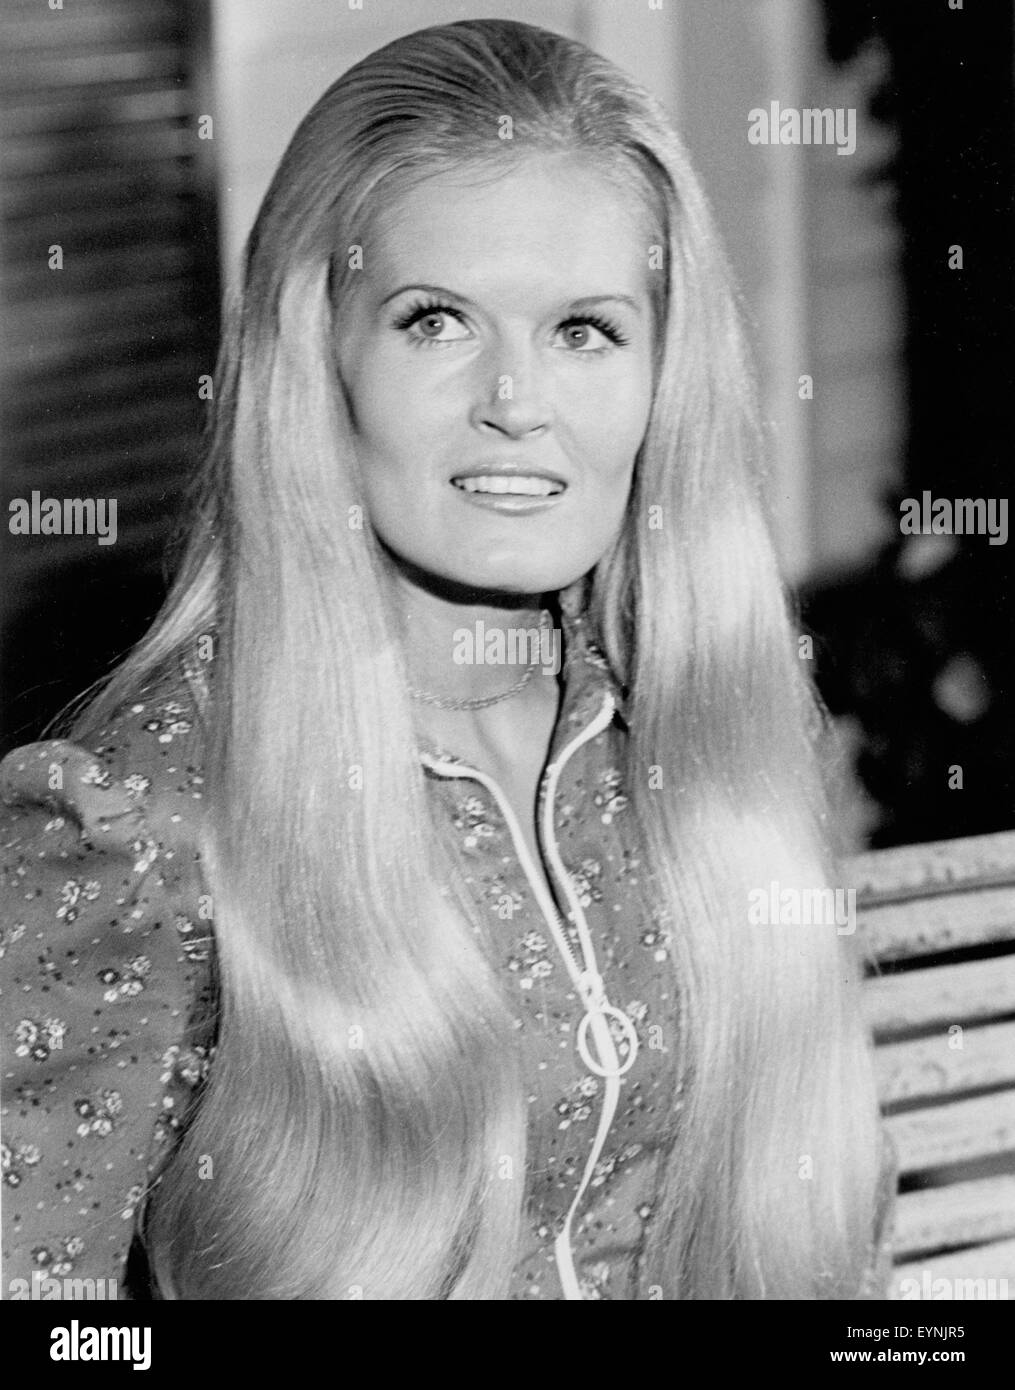 File. 1st Aug, 2015. US country singer LYNN ANDERSON (September 26, 1947 - July 31, 2015) best known for her worldwide 1971 hit (I Never Promised You a) Rose Garden, has died, aged 67. She had been in hospital in Nashville, where she suffered a heart attack on Thursday. Other US hits included You're My Man, How Can I Unlove You? and Top of the World. Pictured: c. 1970's - Lynn Anderson. Credit:  Globe Photos/ZUMAPRESS.com/Alamy Live News Stock Photo